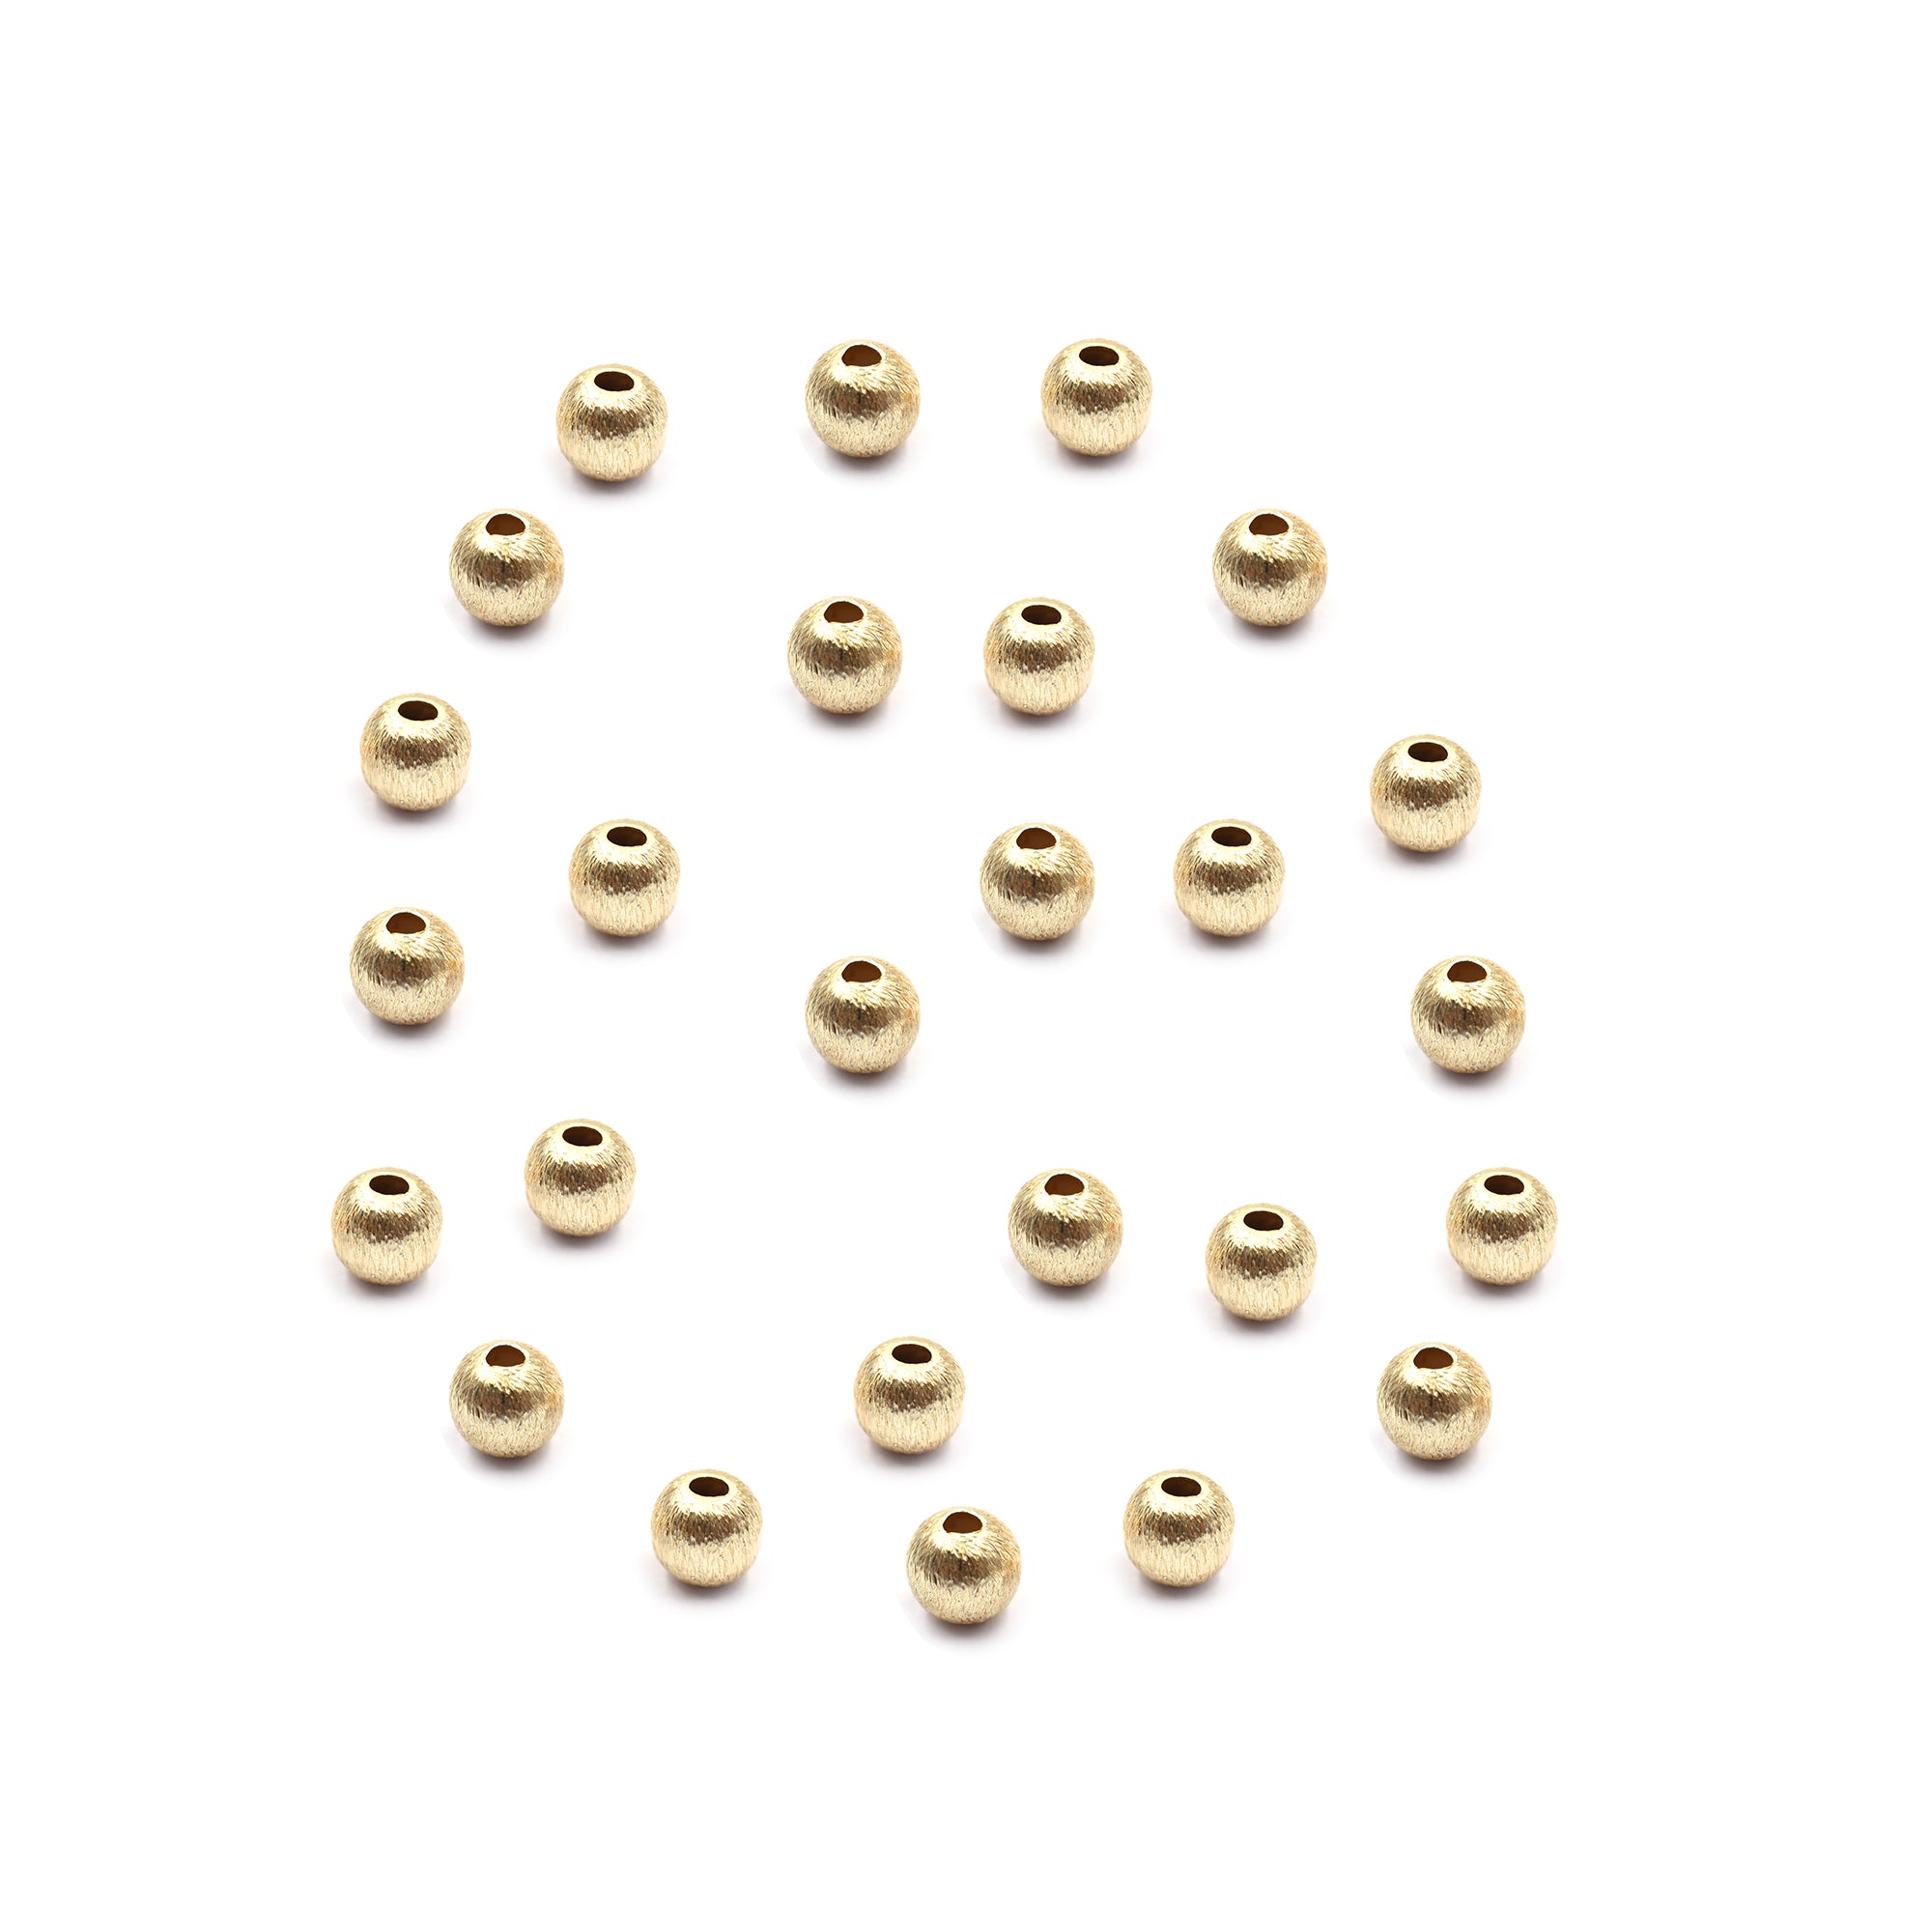 110 Pcs 6mm Spacer Brushed Matte Finish Beads Gold Plated Copper